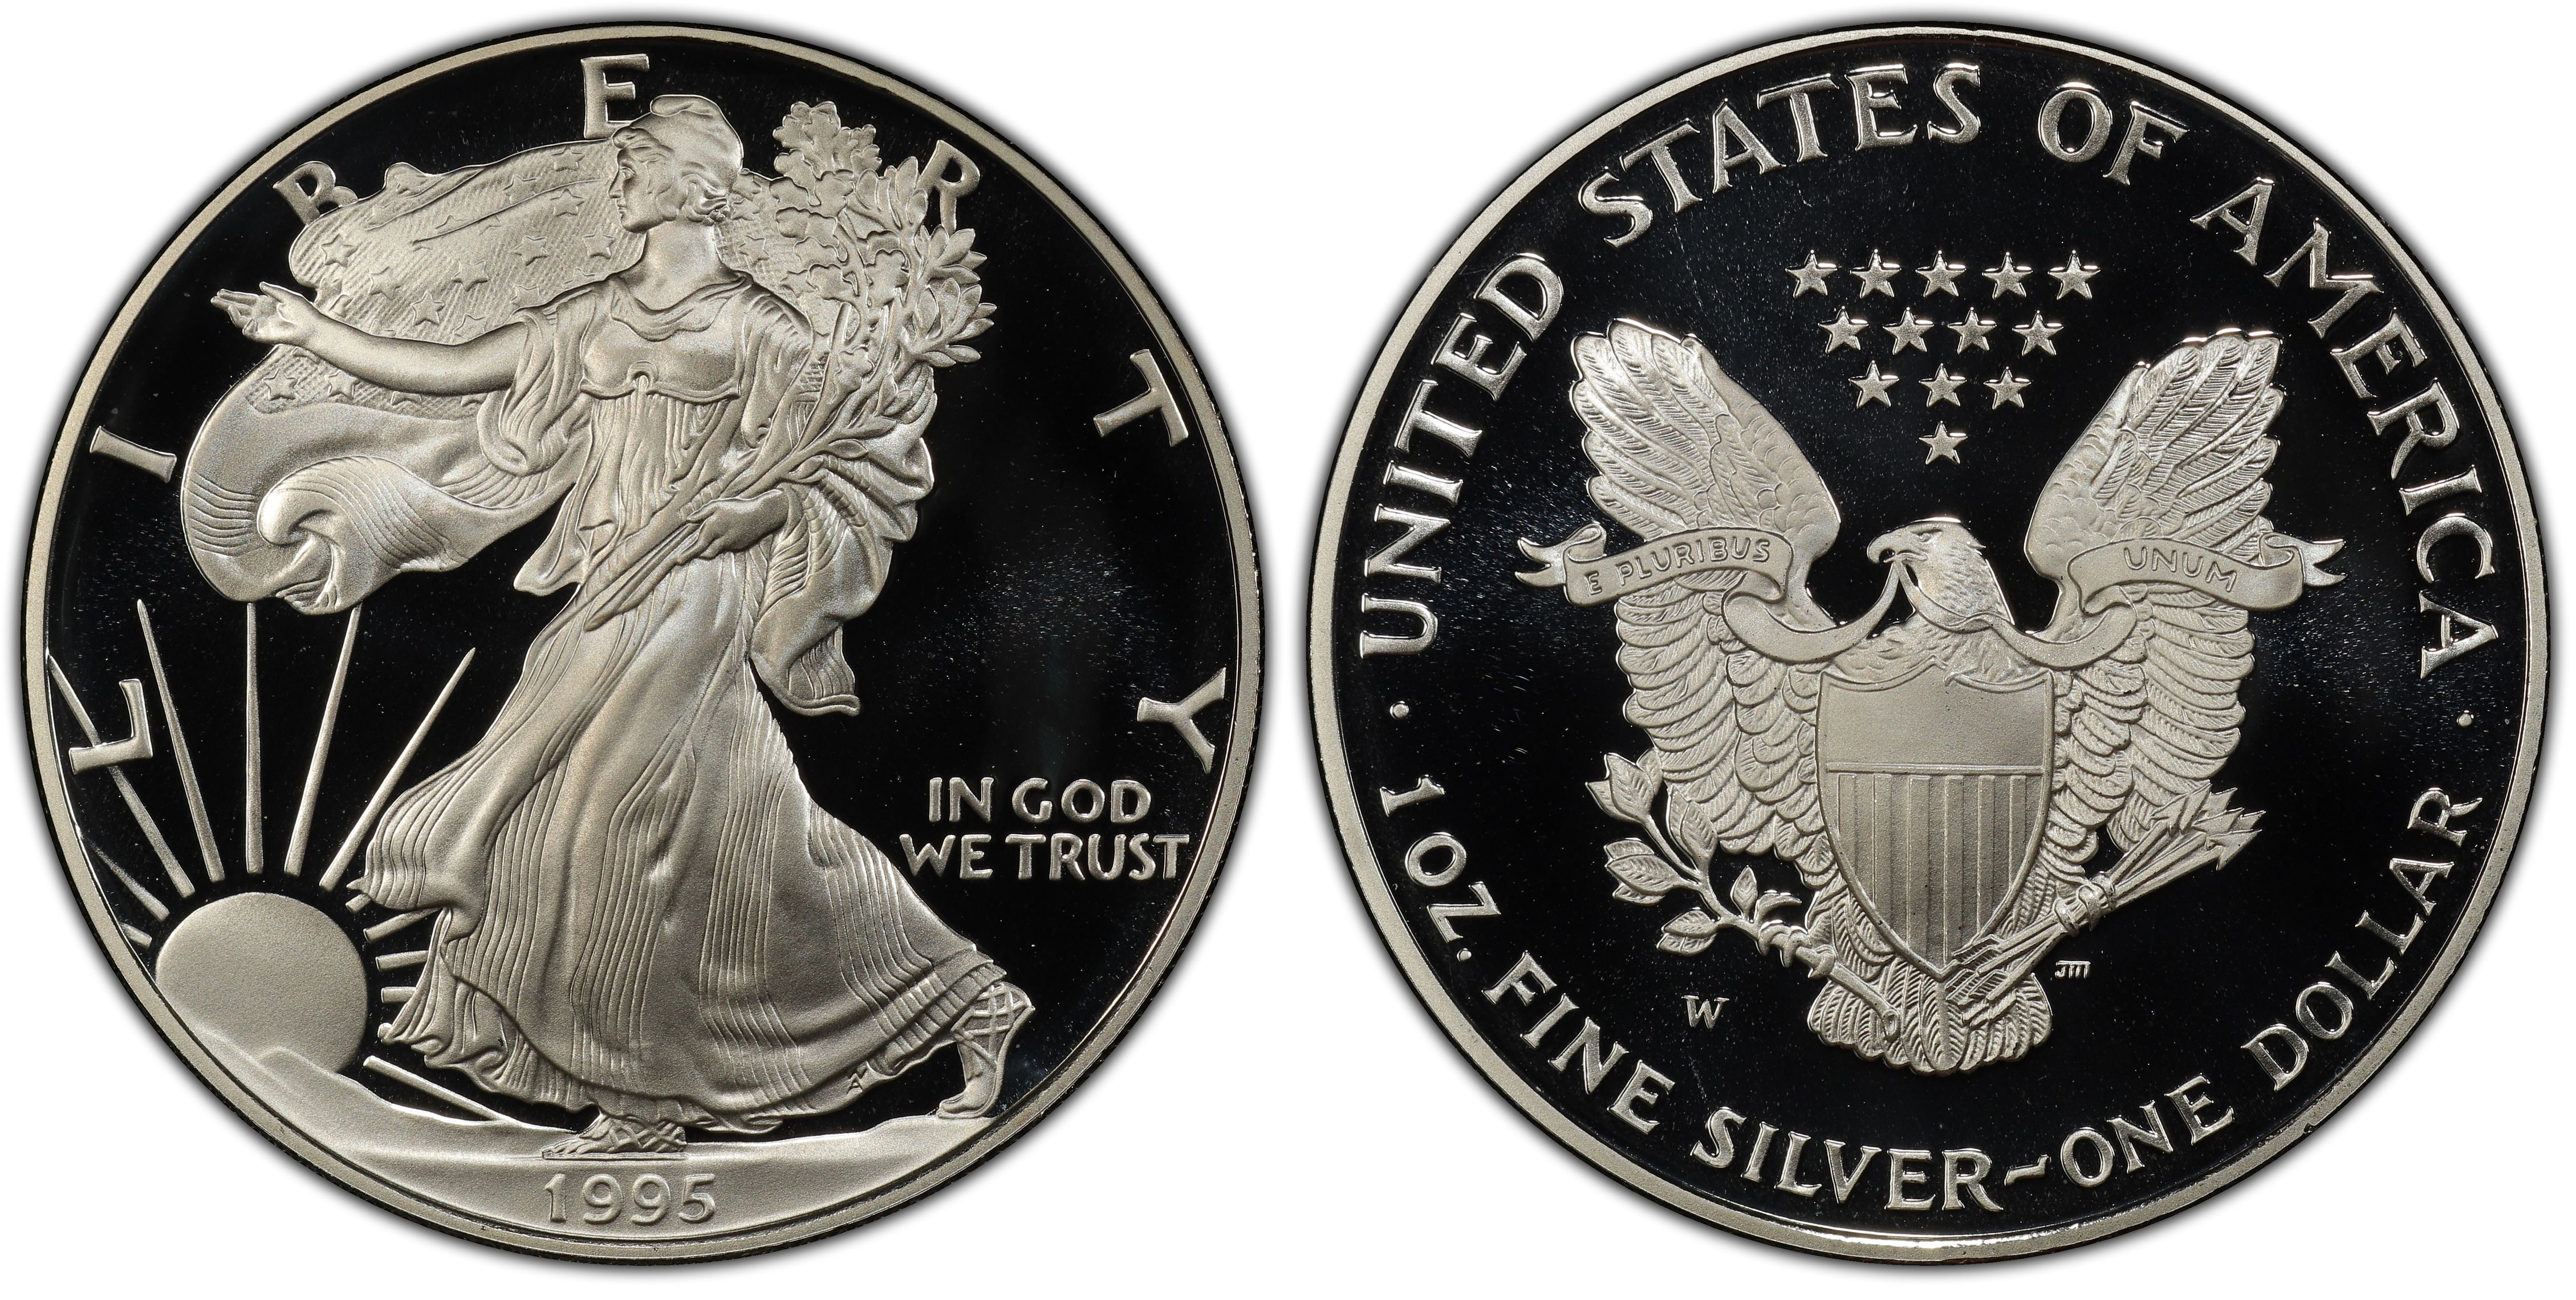 1995-W $1 Silver Eagle, DCAM (Proof) Silver Eagles - PCGS CoinFacts